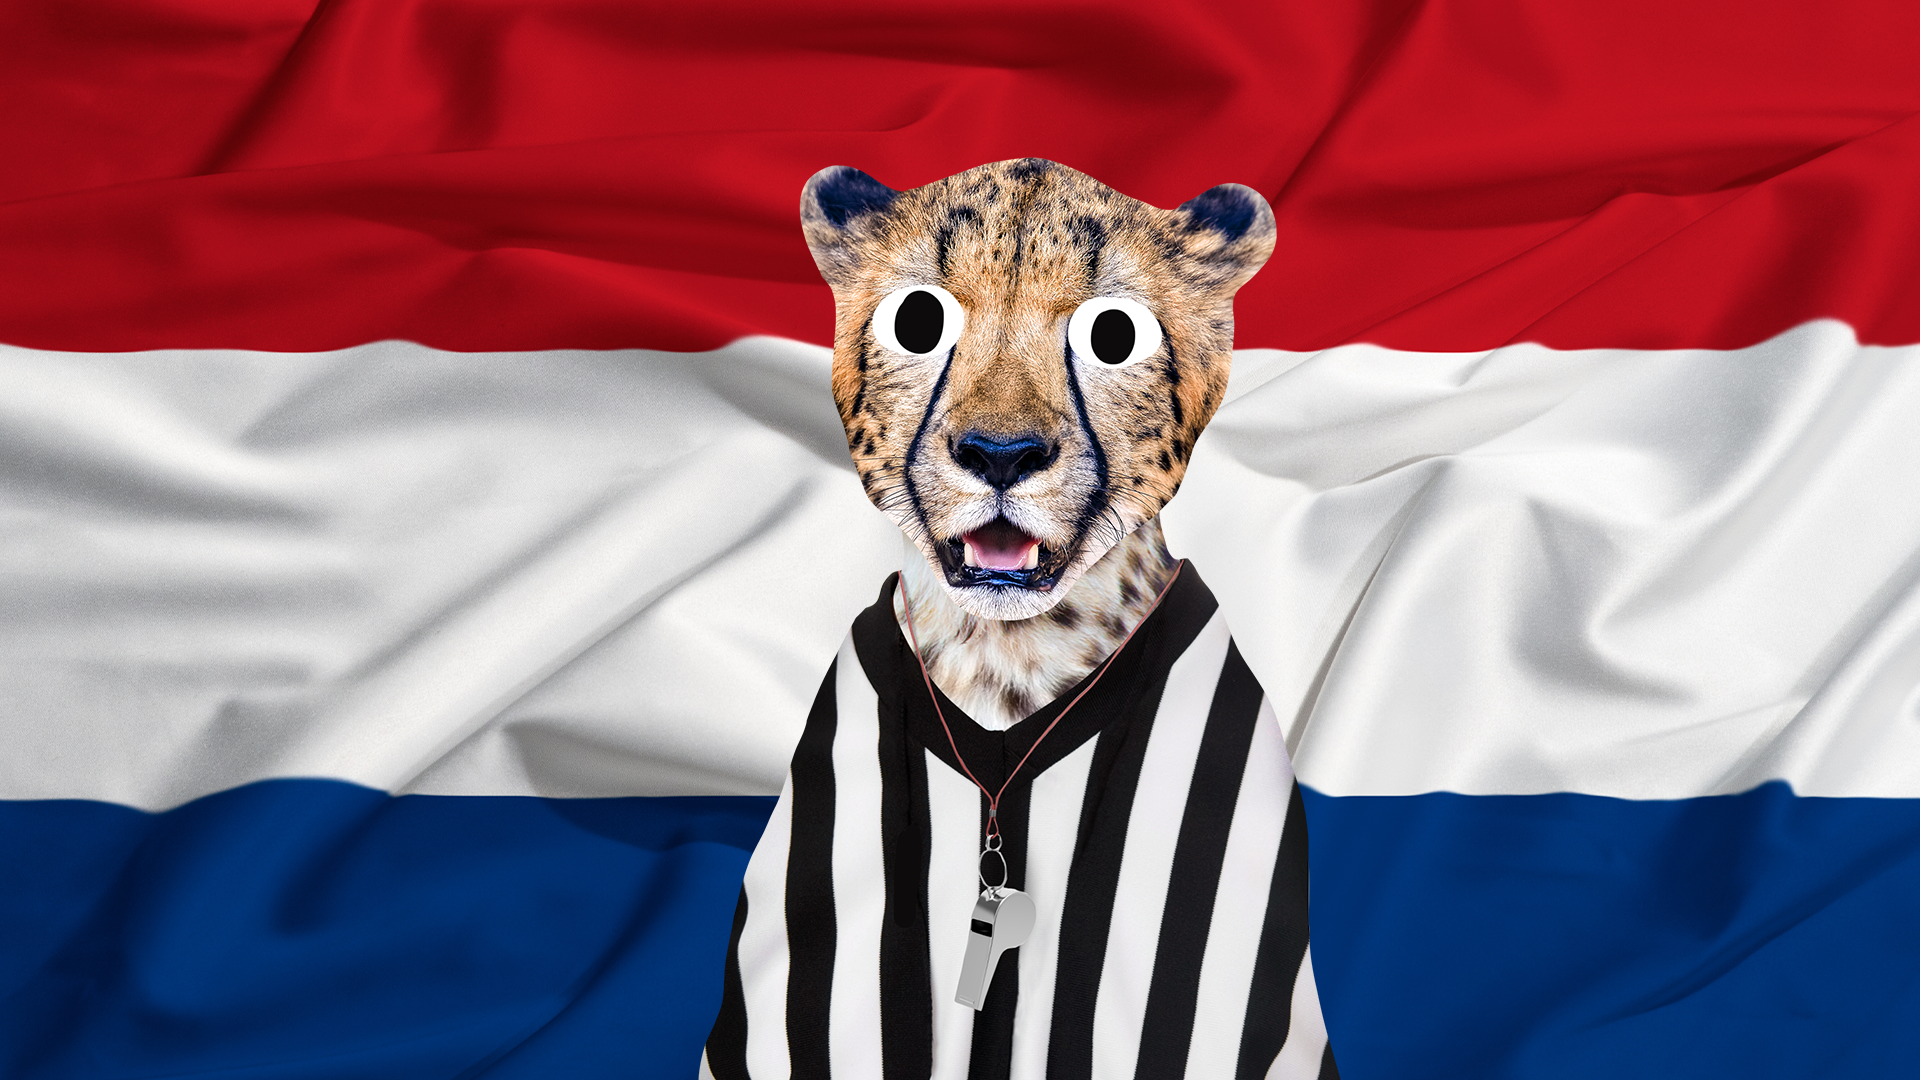 Ref cheetah in front of Dutch flag